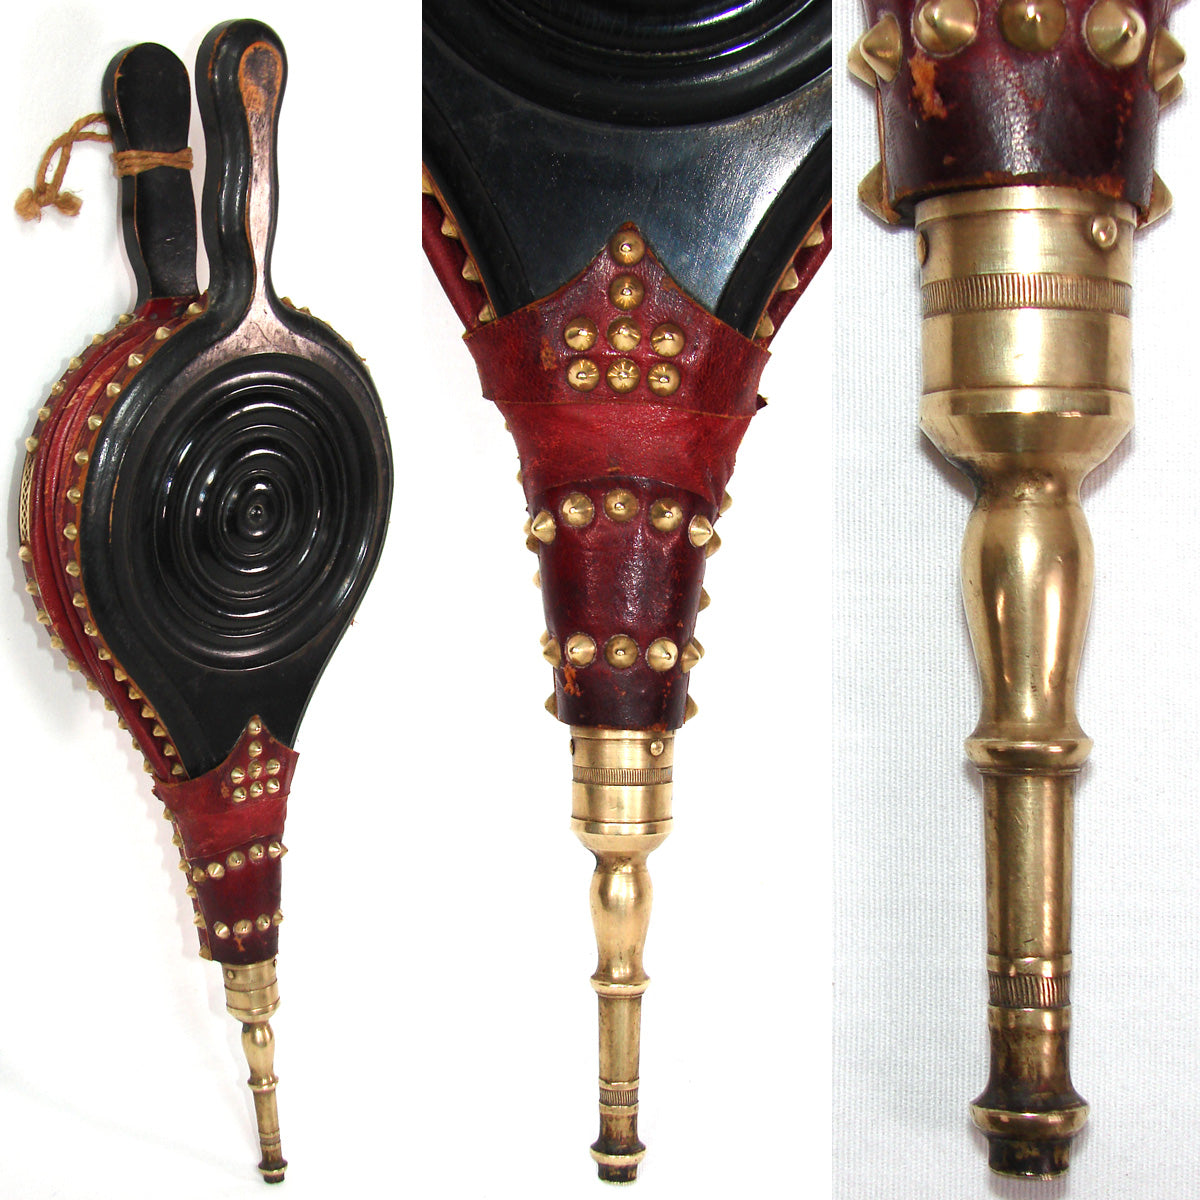 Rare 19th C French Napoleon III Carved Wood Fireplace Bellows with Ebonized Finish, Original Red Leather Baffles!